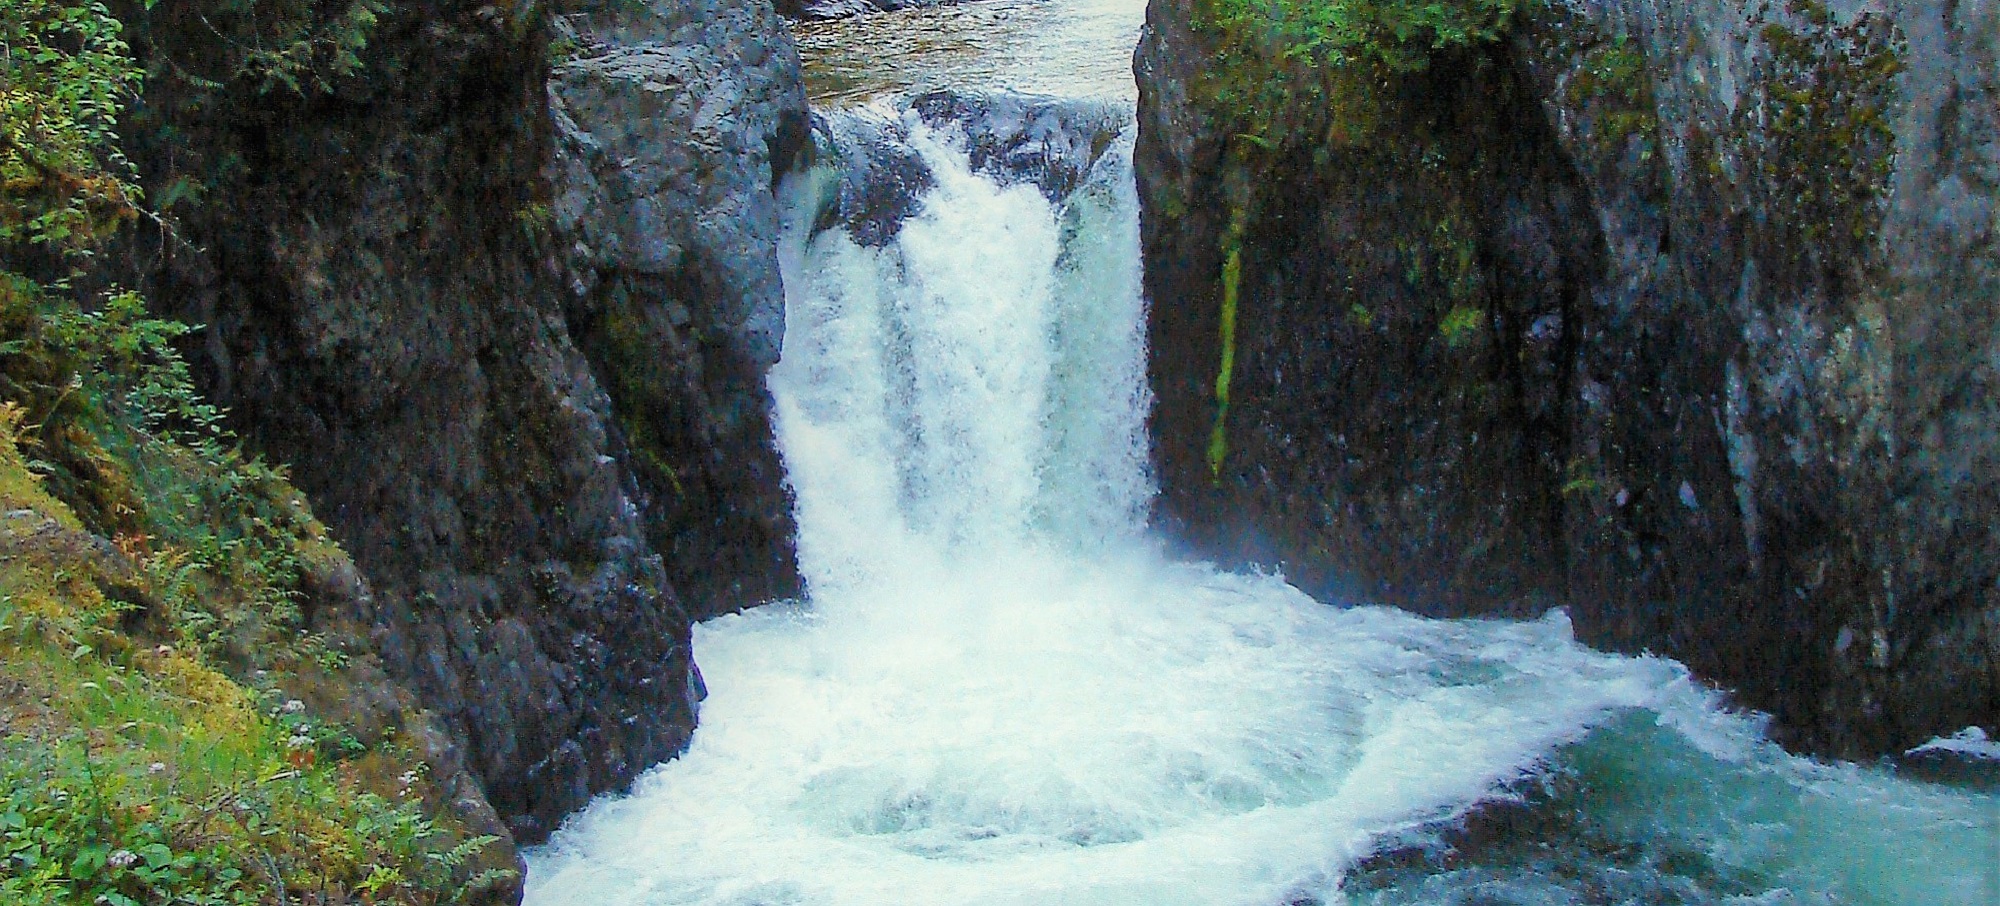 The Falls of Englishman River, seen at Englishman River Park on Vancouver Island.